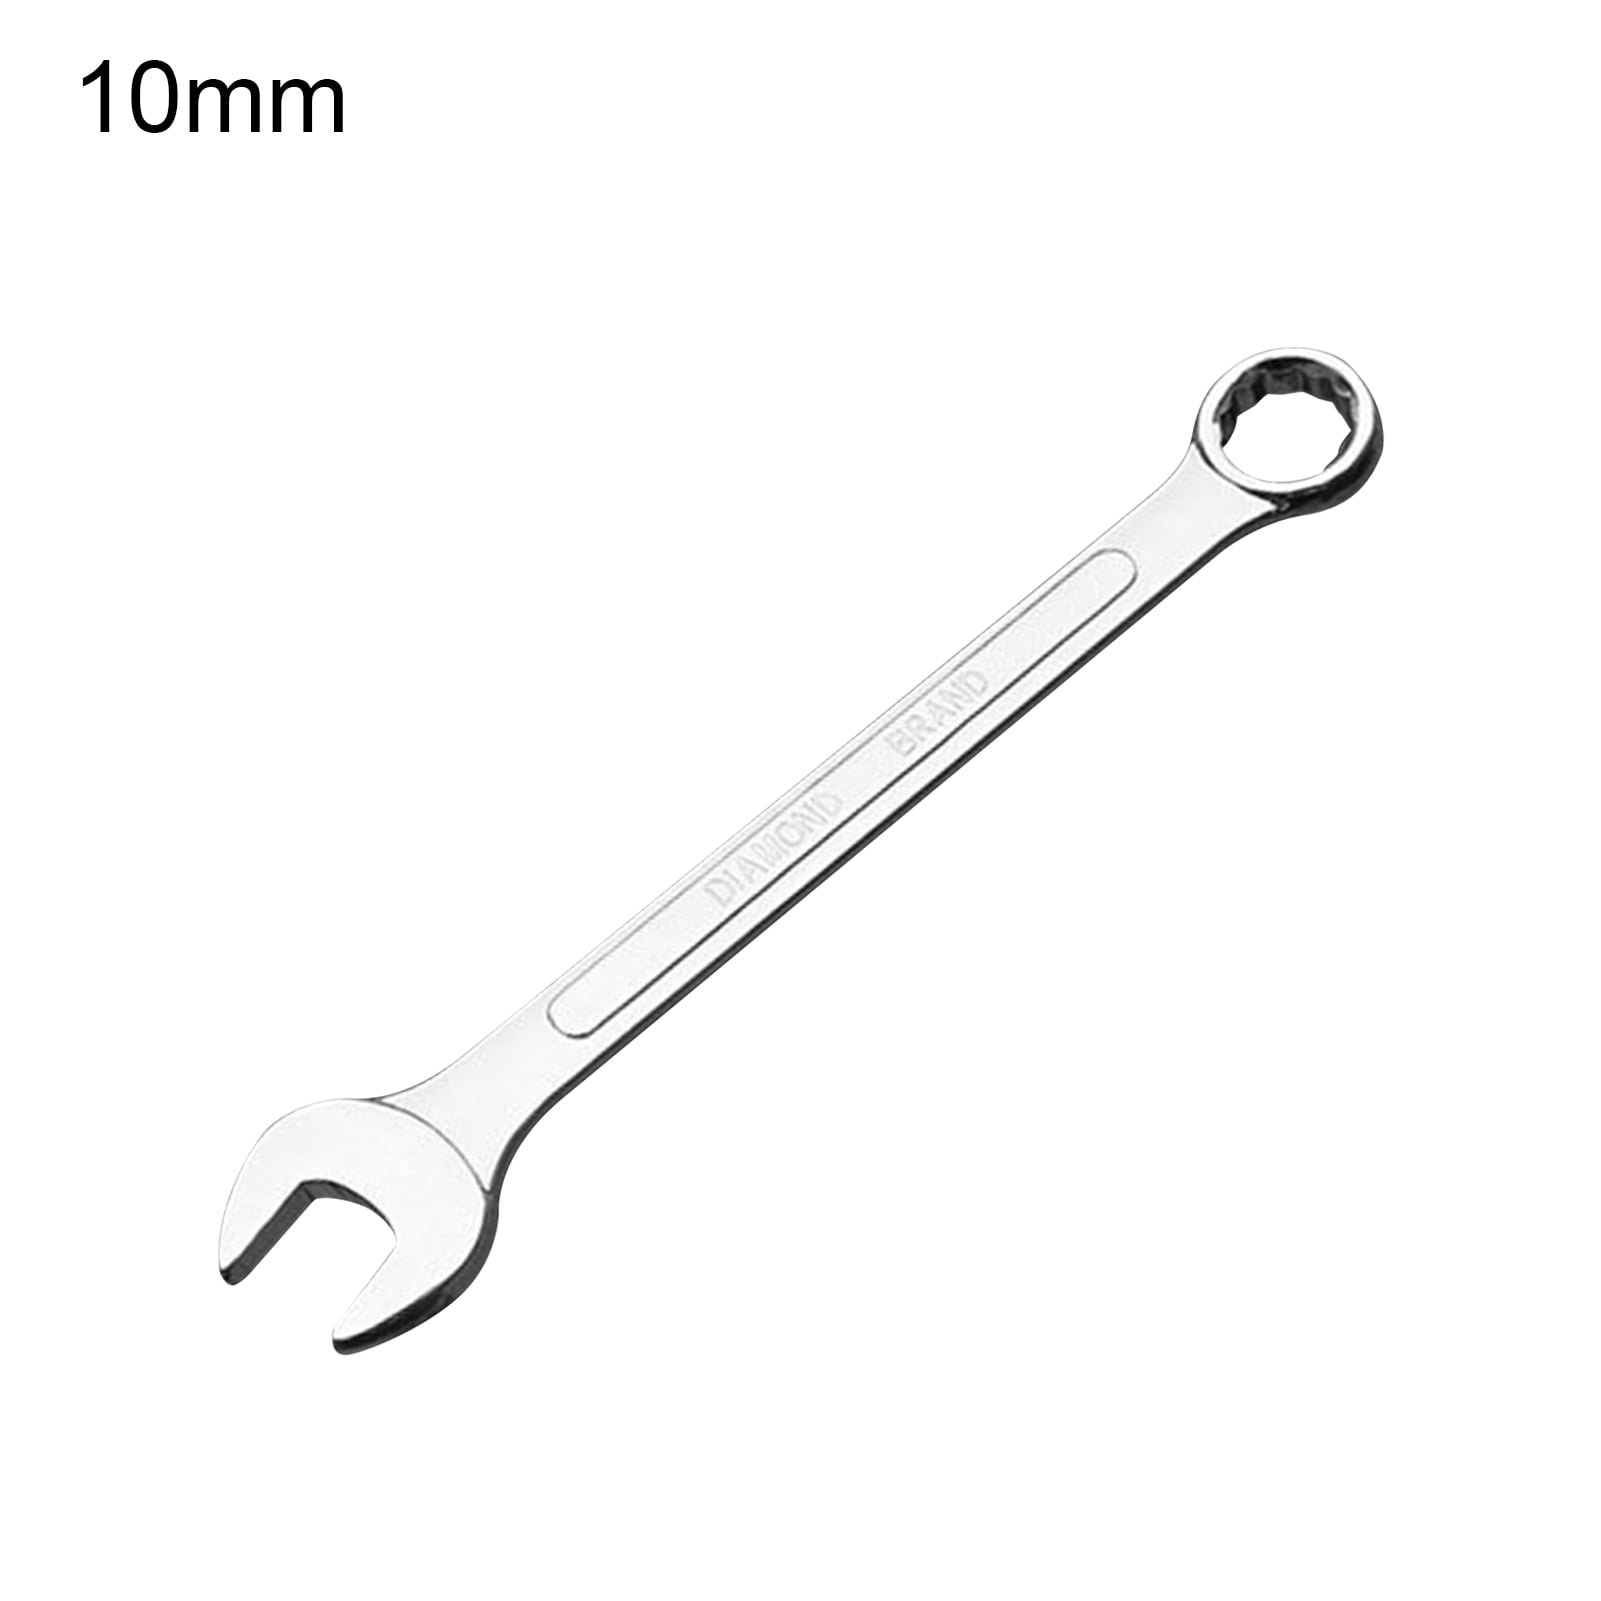 Aokid 6-18mm Wrench Good Hardenability Anti-corrosion Hand Tools Open End Ratchet Combination Wrench for Home,Hardware tools,Good Hardenability,Anti